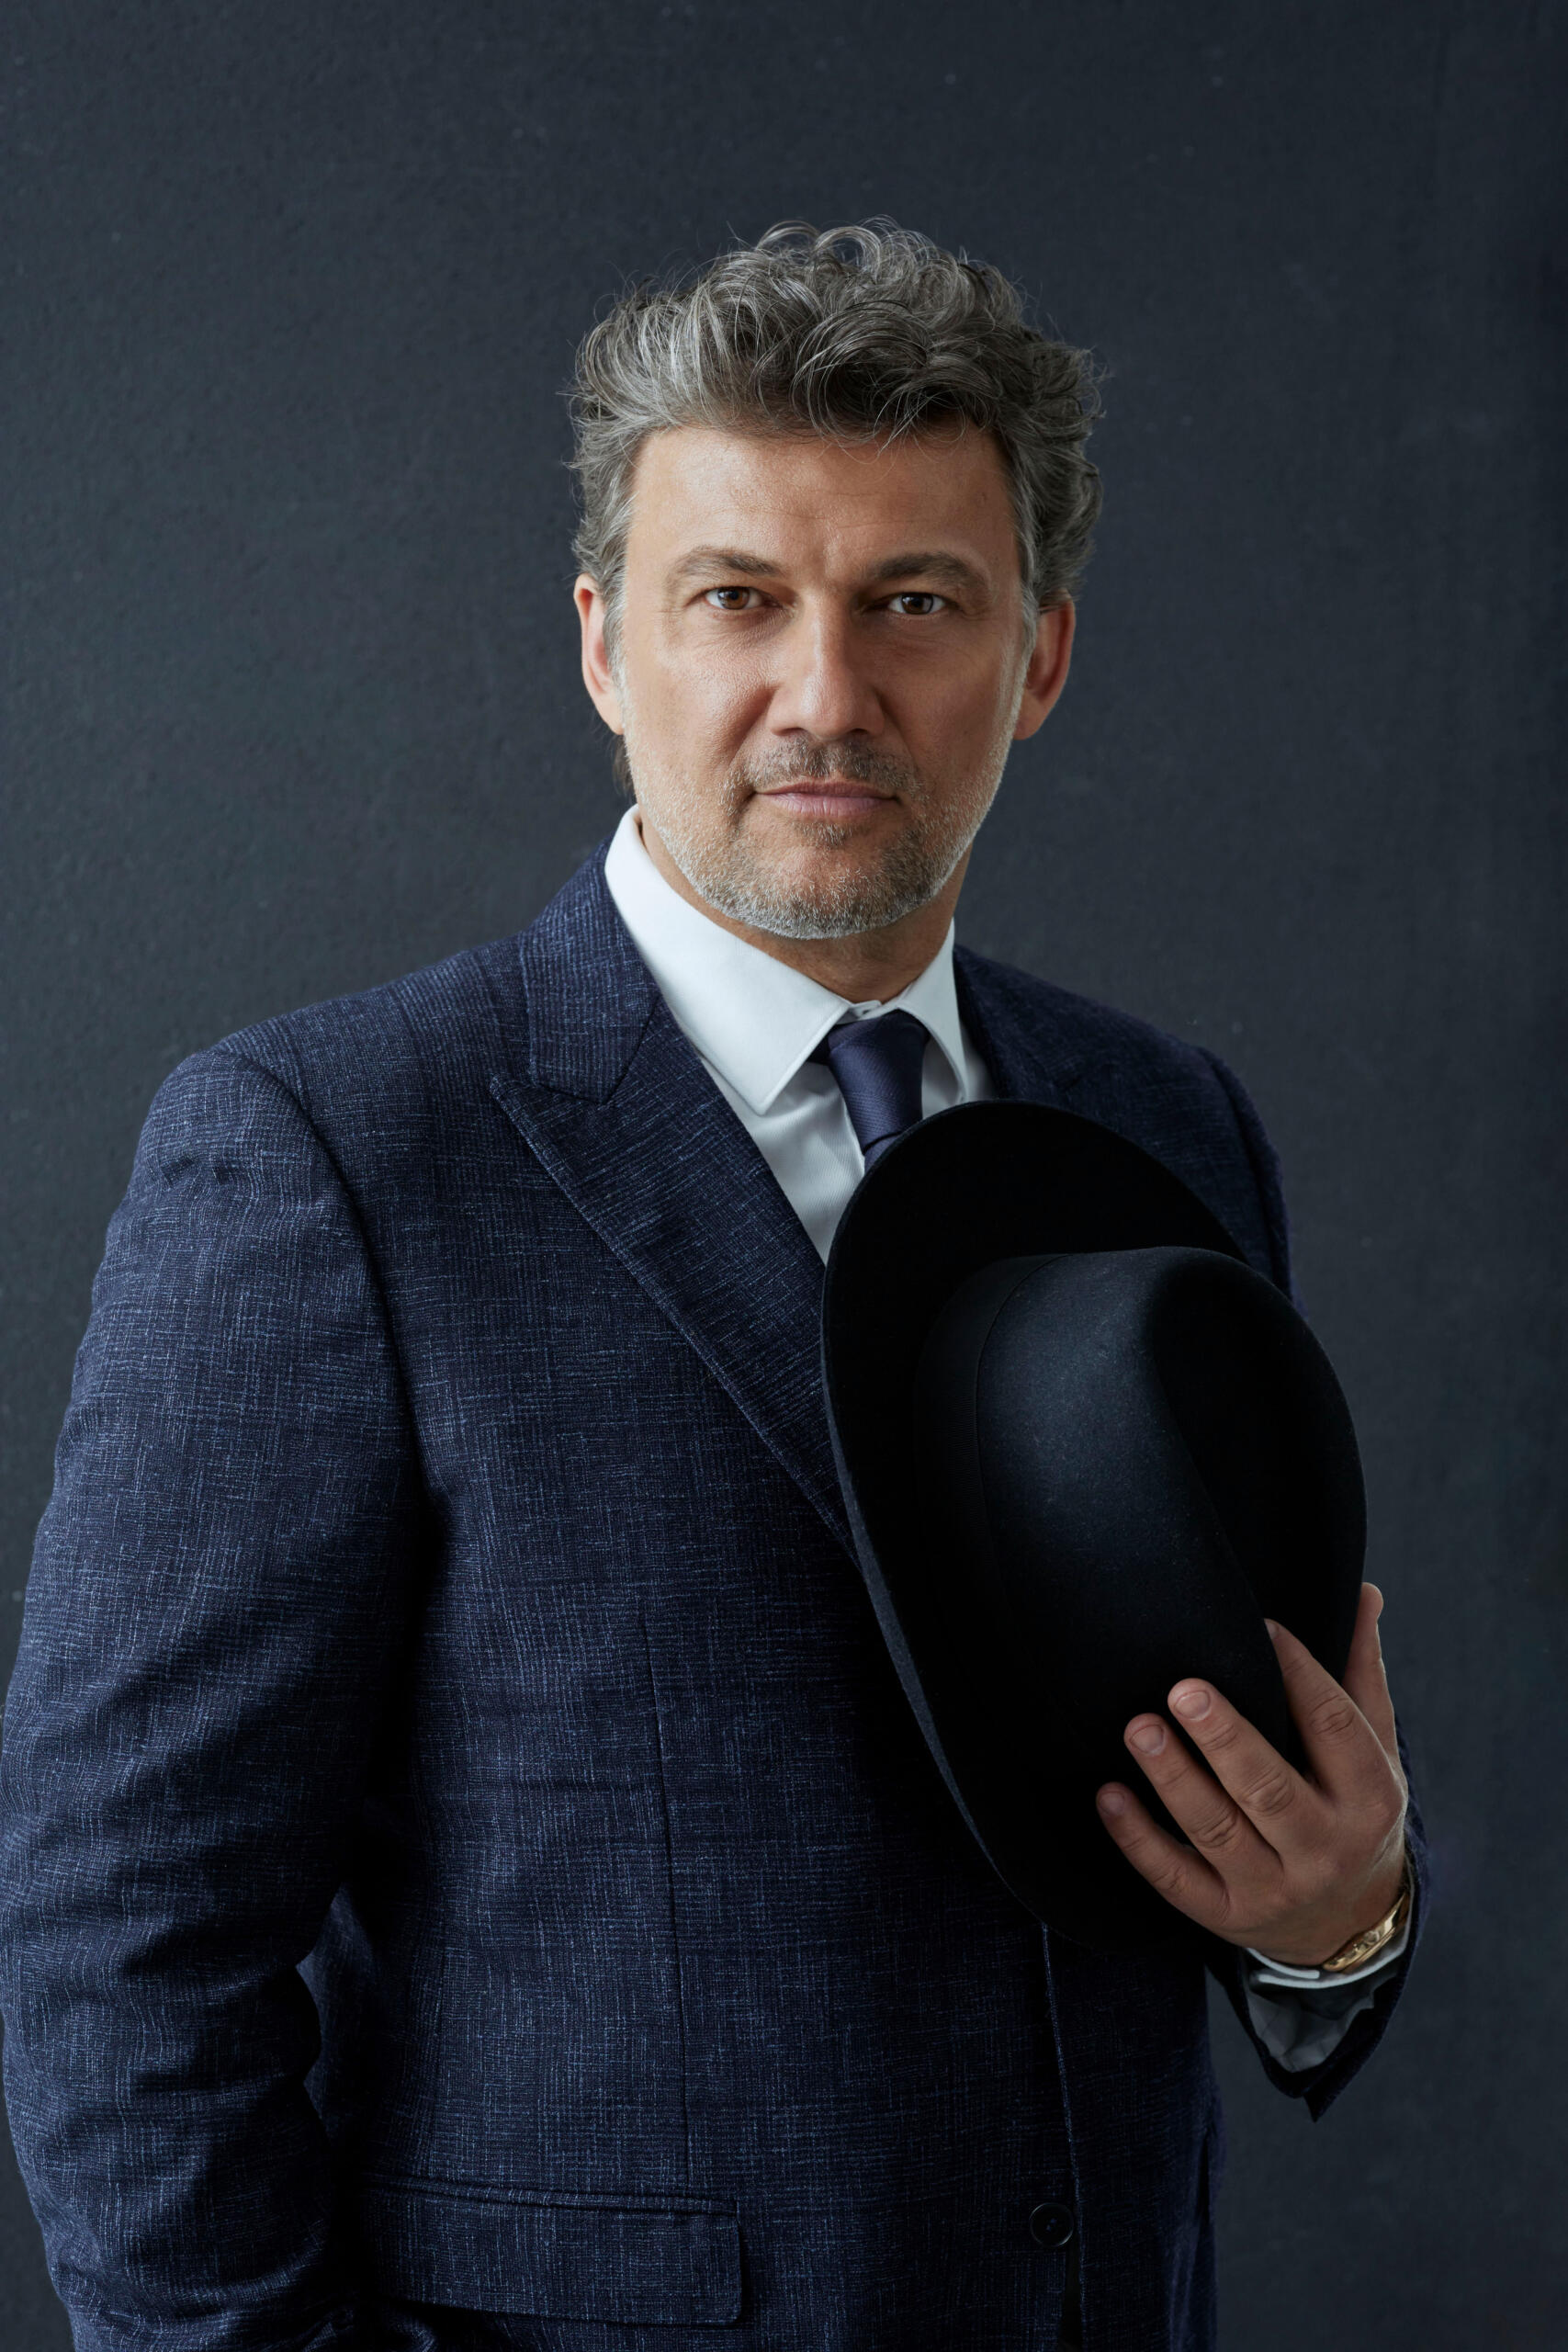 The singer Jonas Kaufmann stands in front of a dark wall. He is holding a hat in his hand.